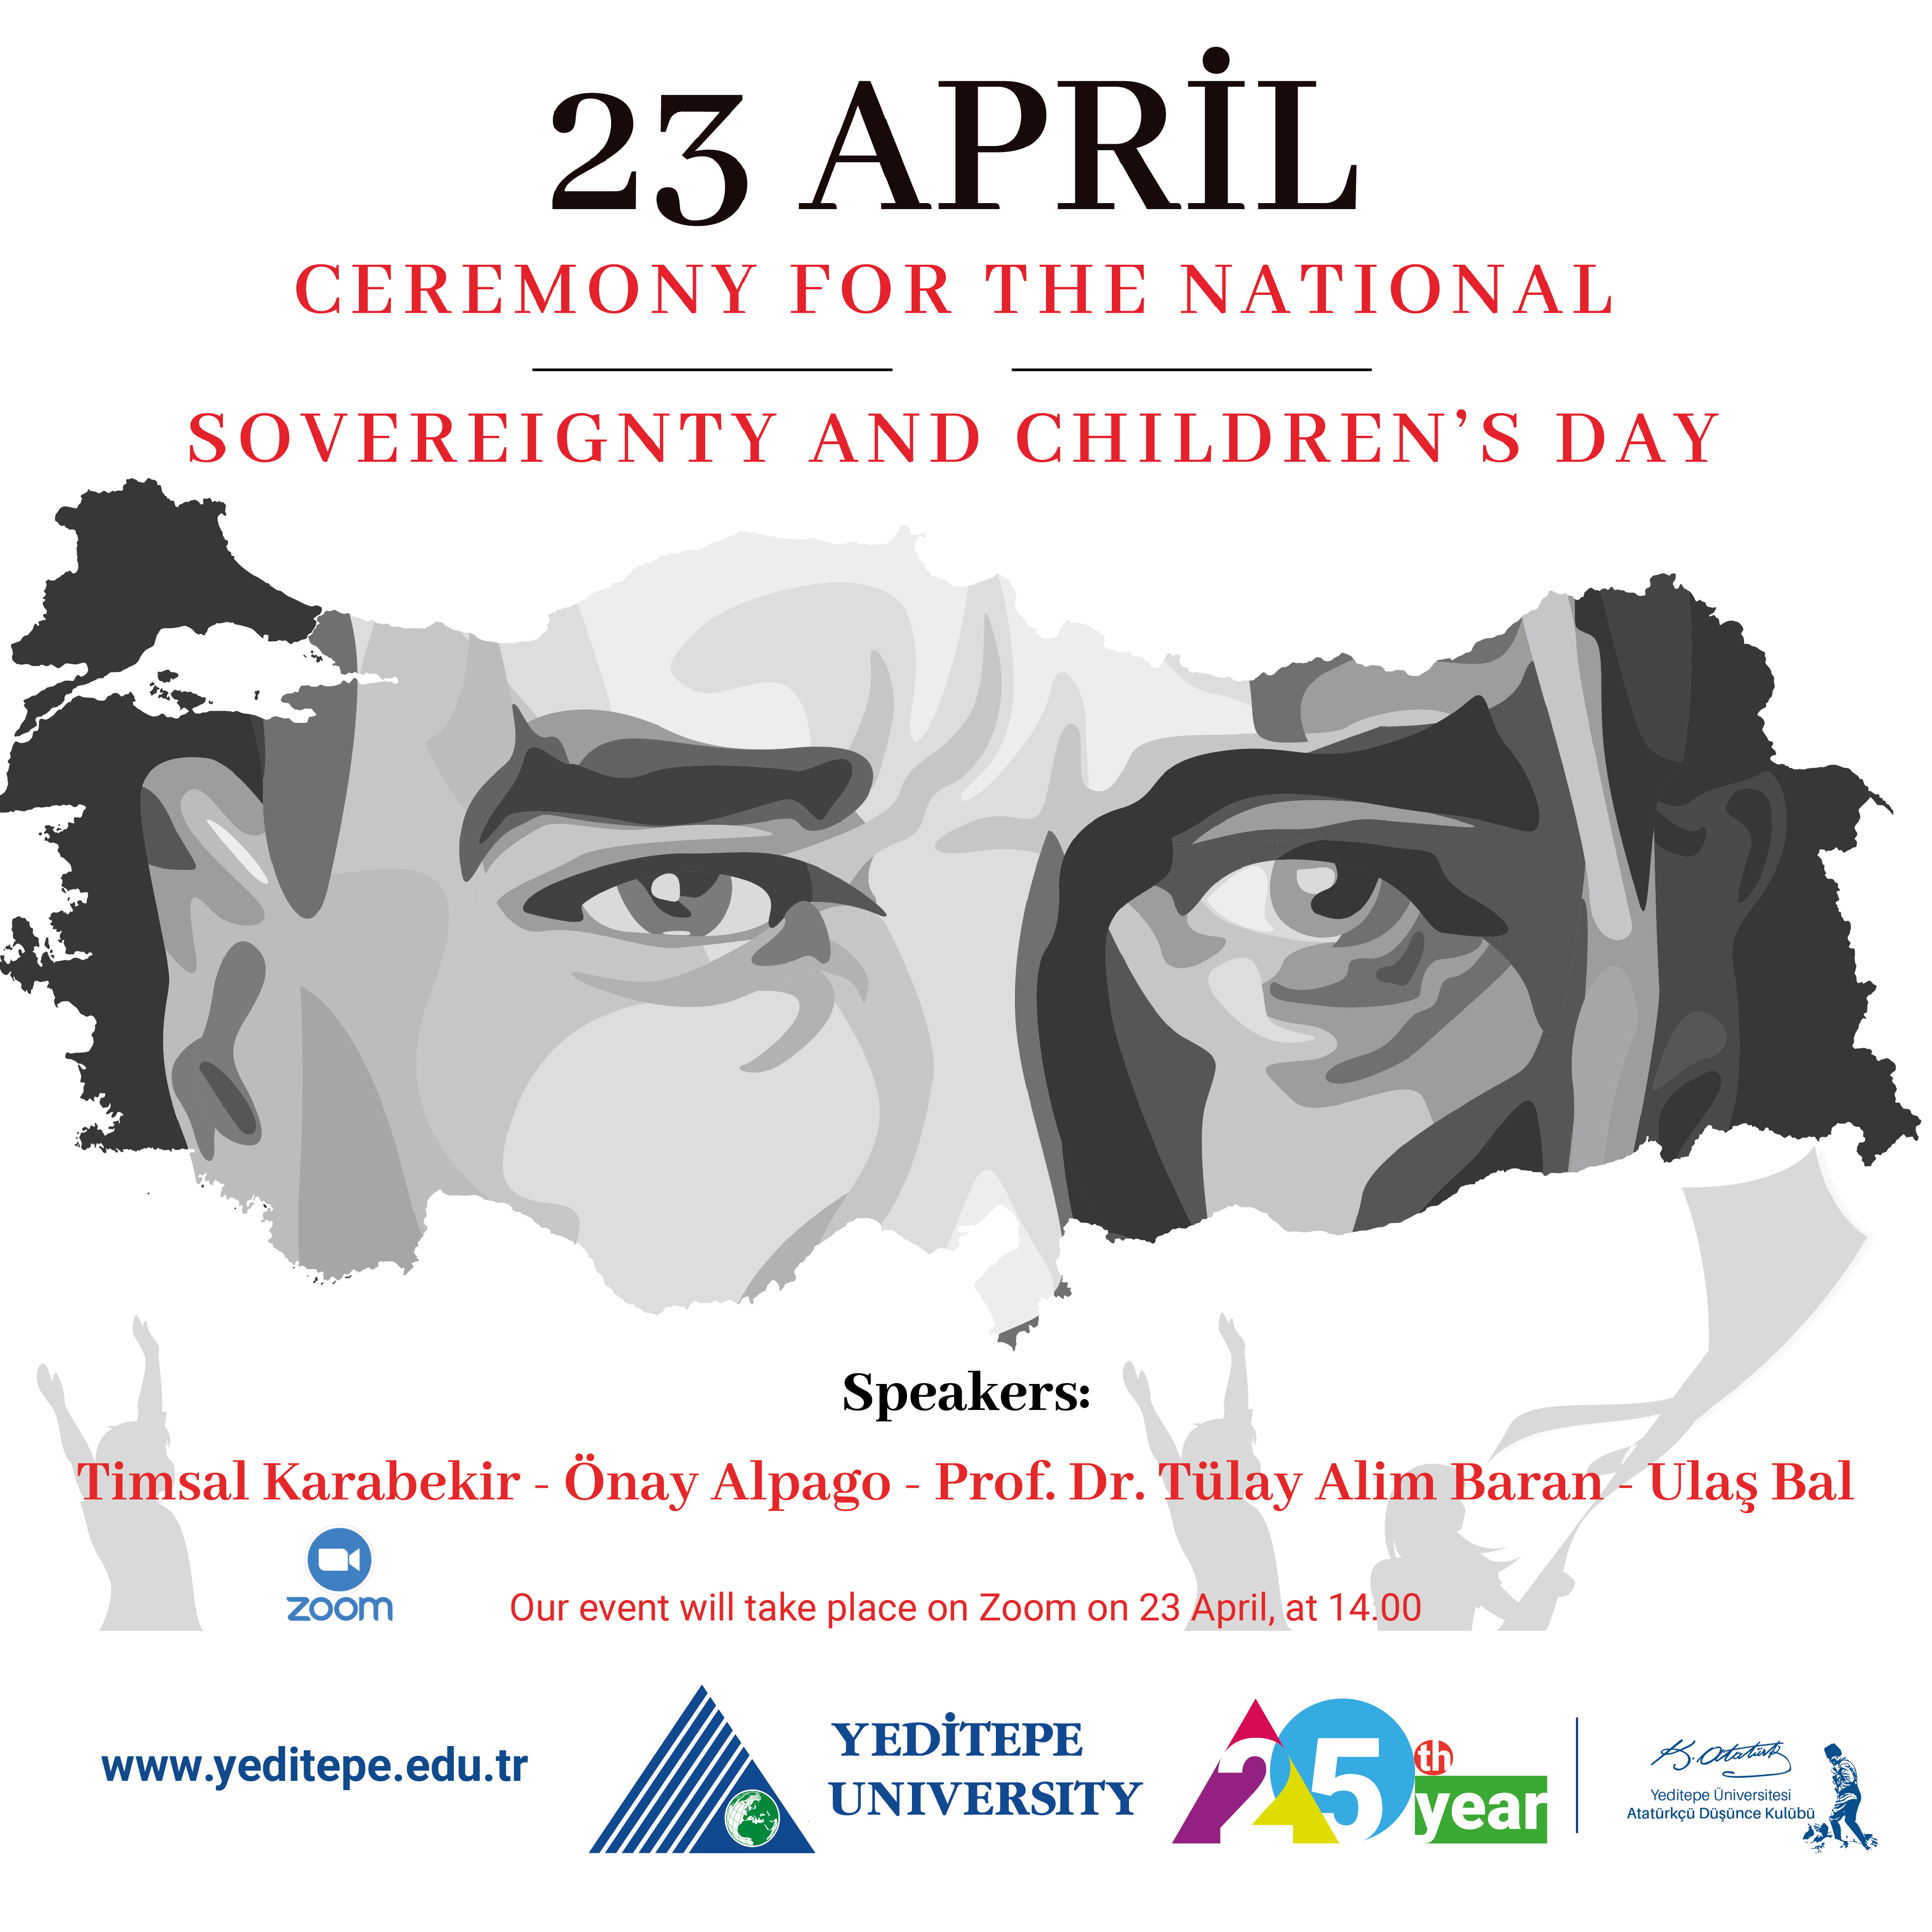 23 April Ceremony for The National Sovereignty and Children's Day